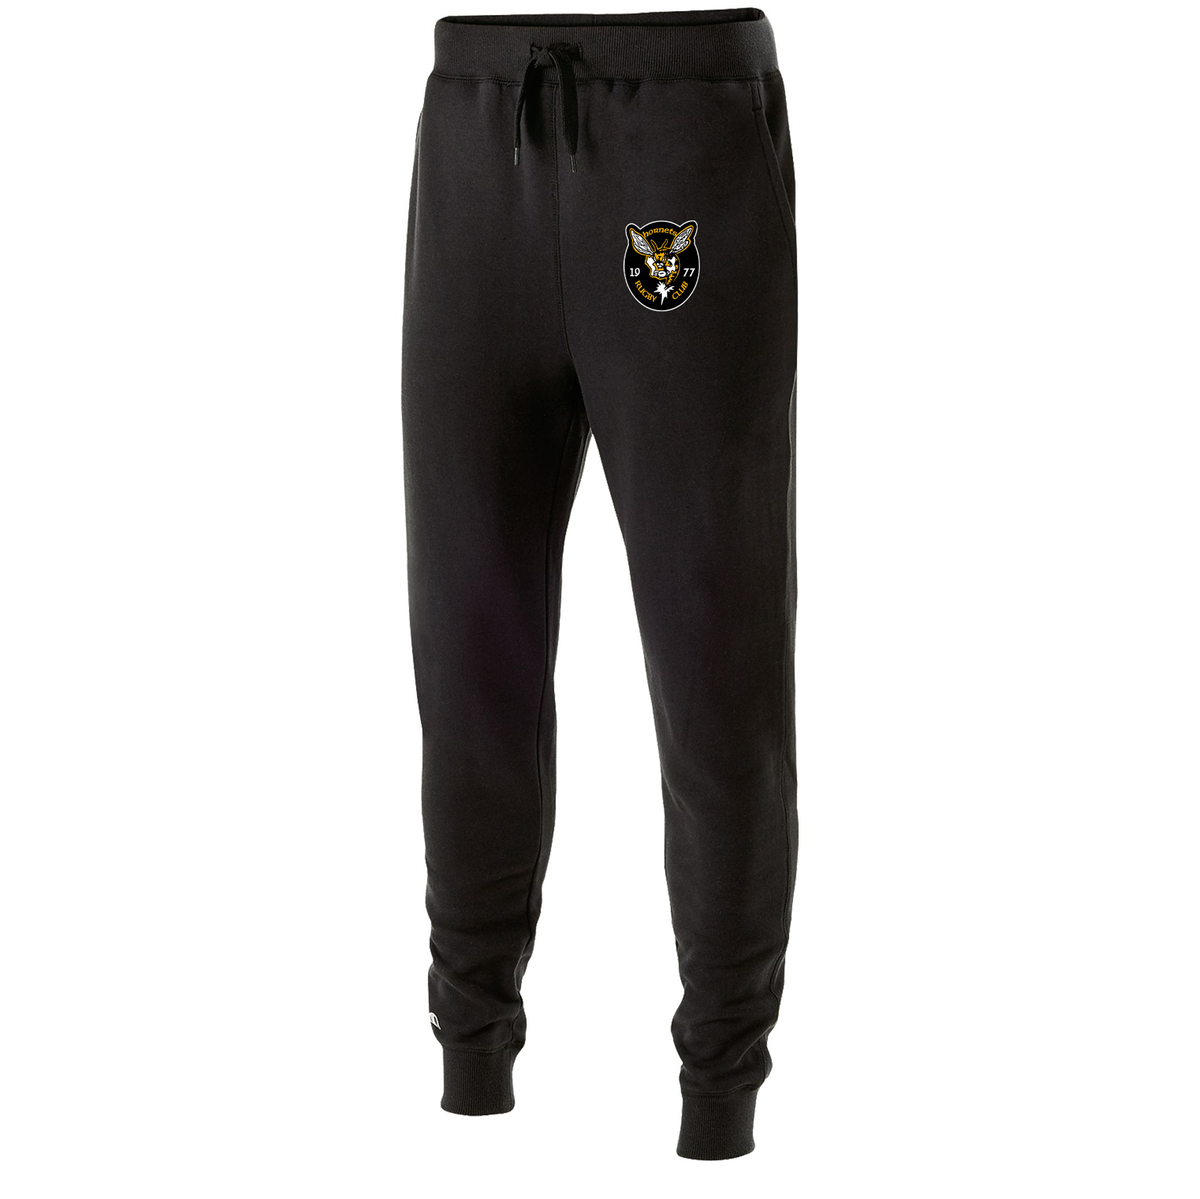 St. Louis Hornets Rugby Club 60/40 Fleece Jogger